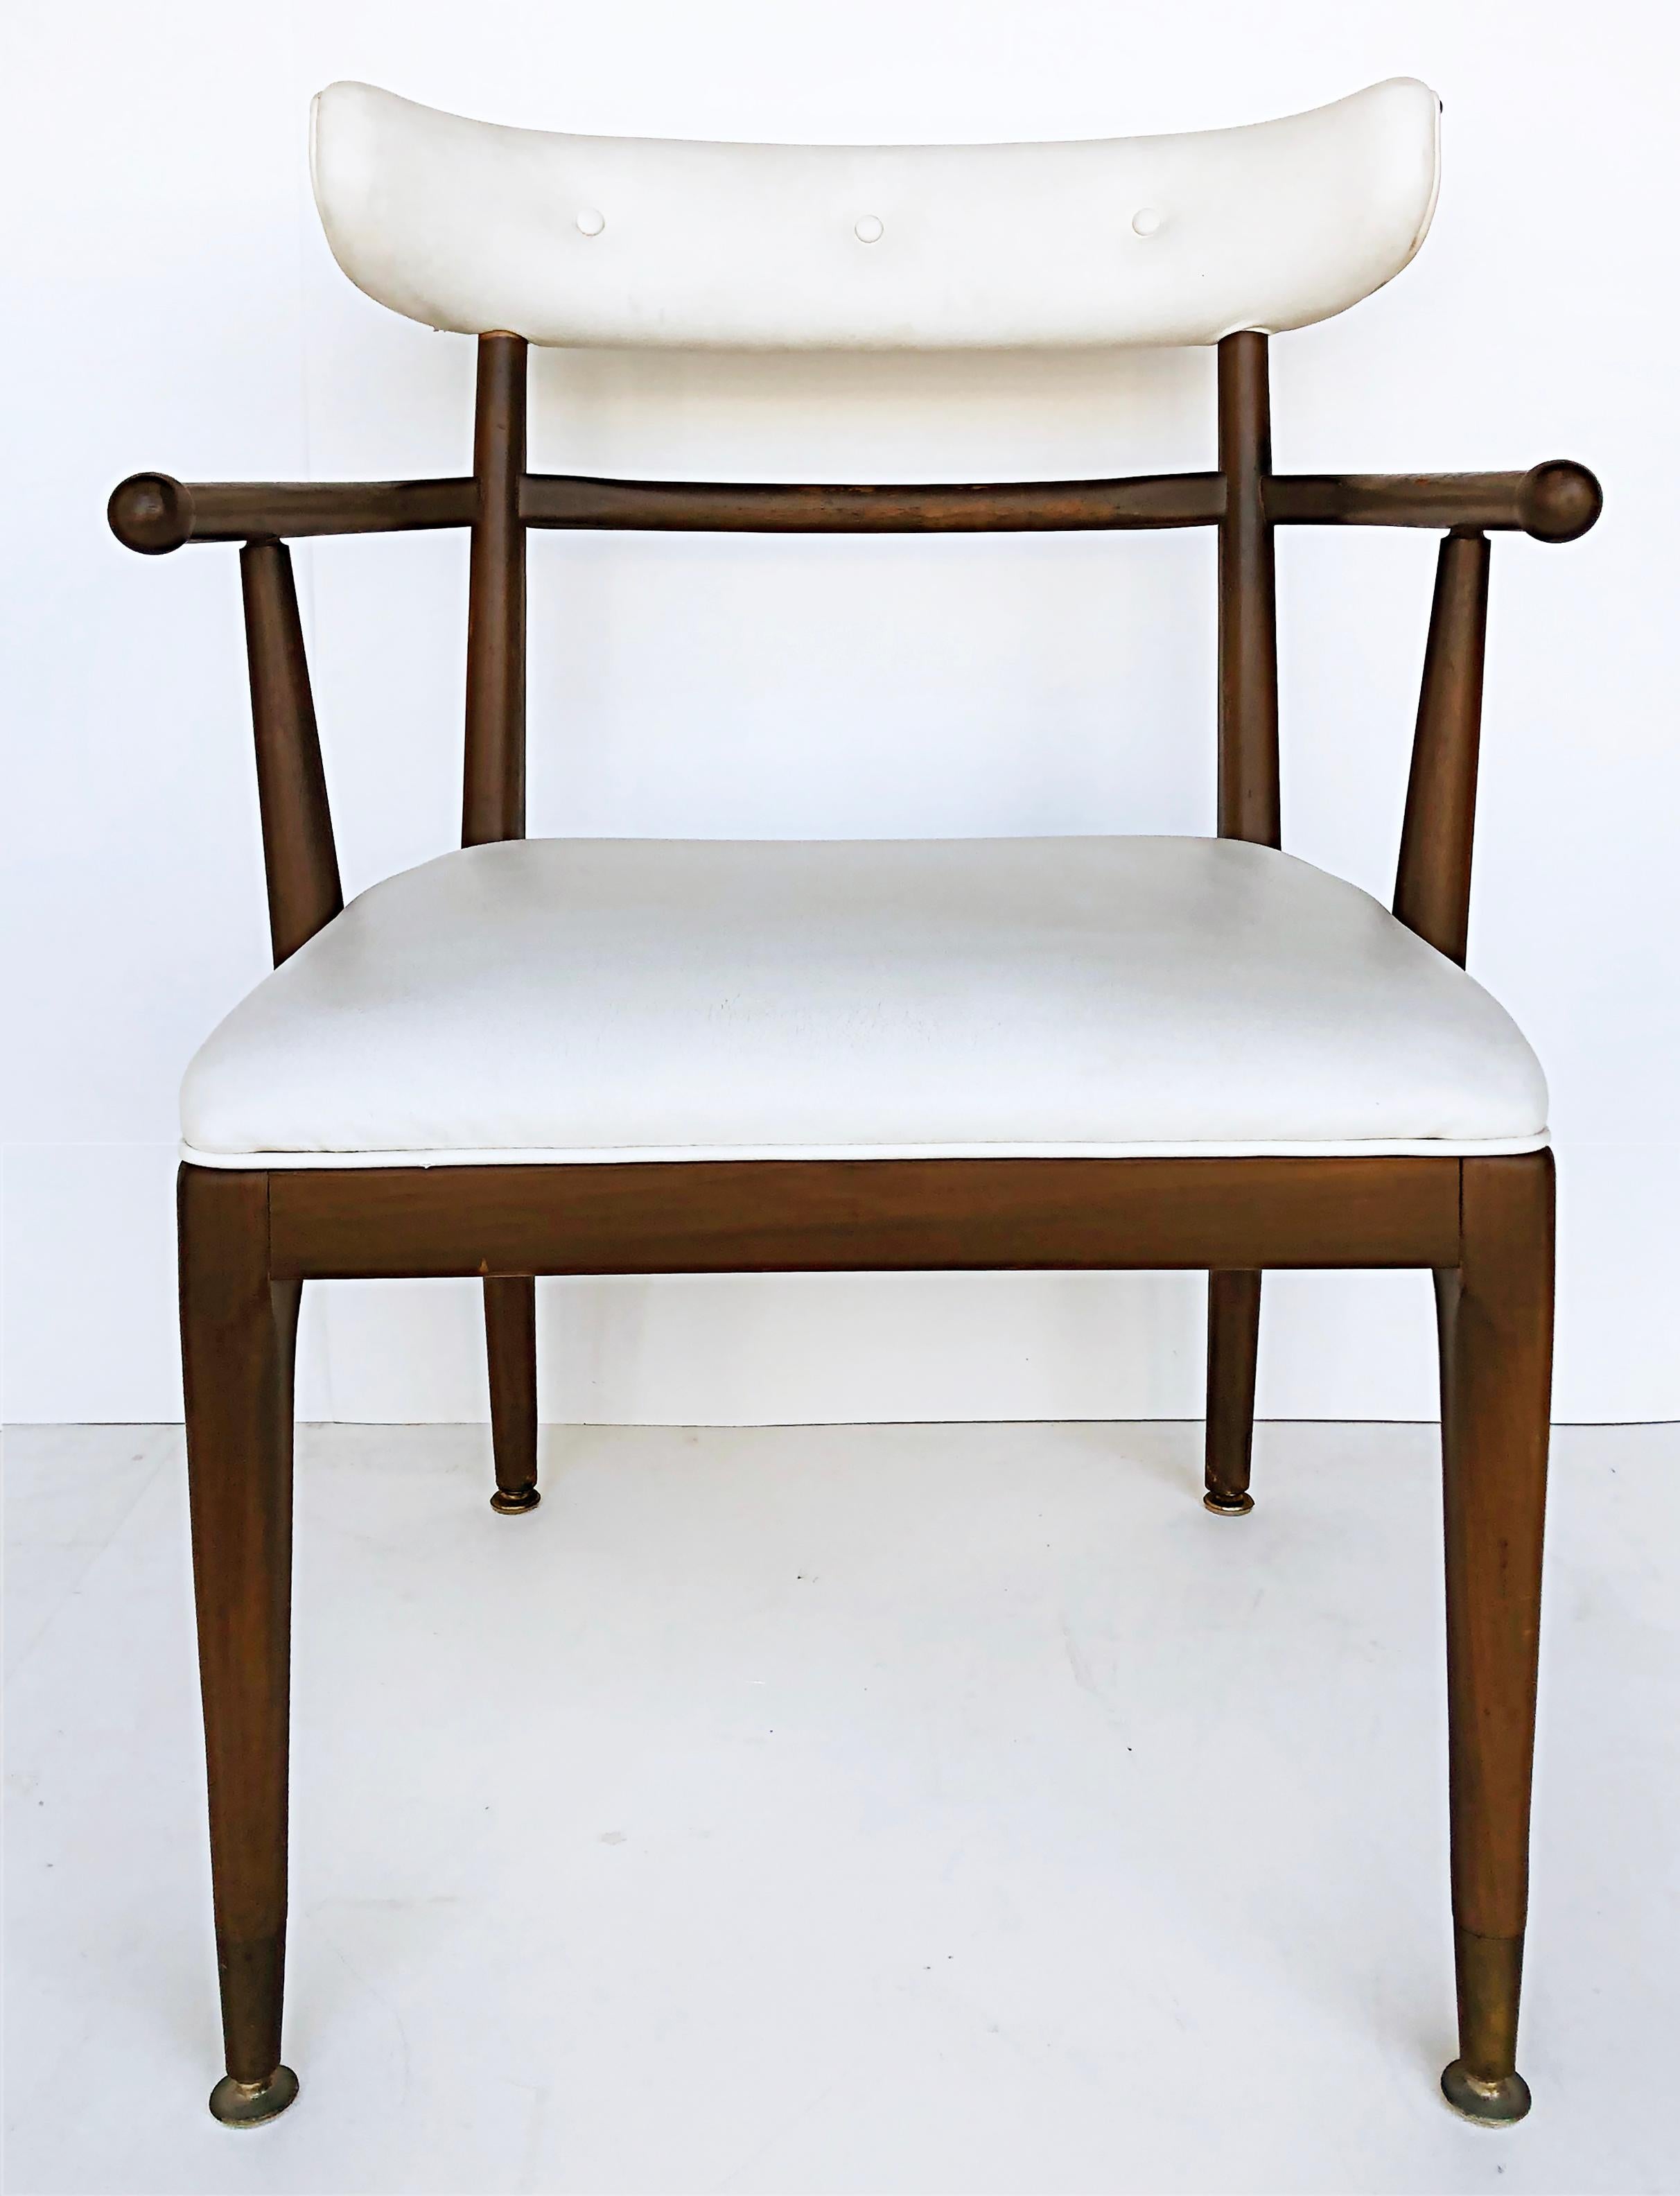 American Mid-Century Modernist Dining Chairs, Set of 6, 2 Arms, 4 Sides In Good Condition For Sale In Miami, FL